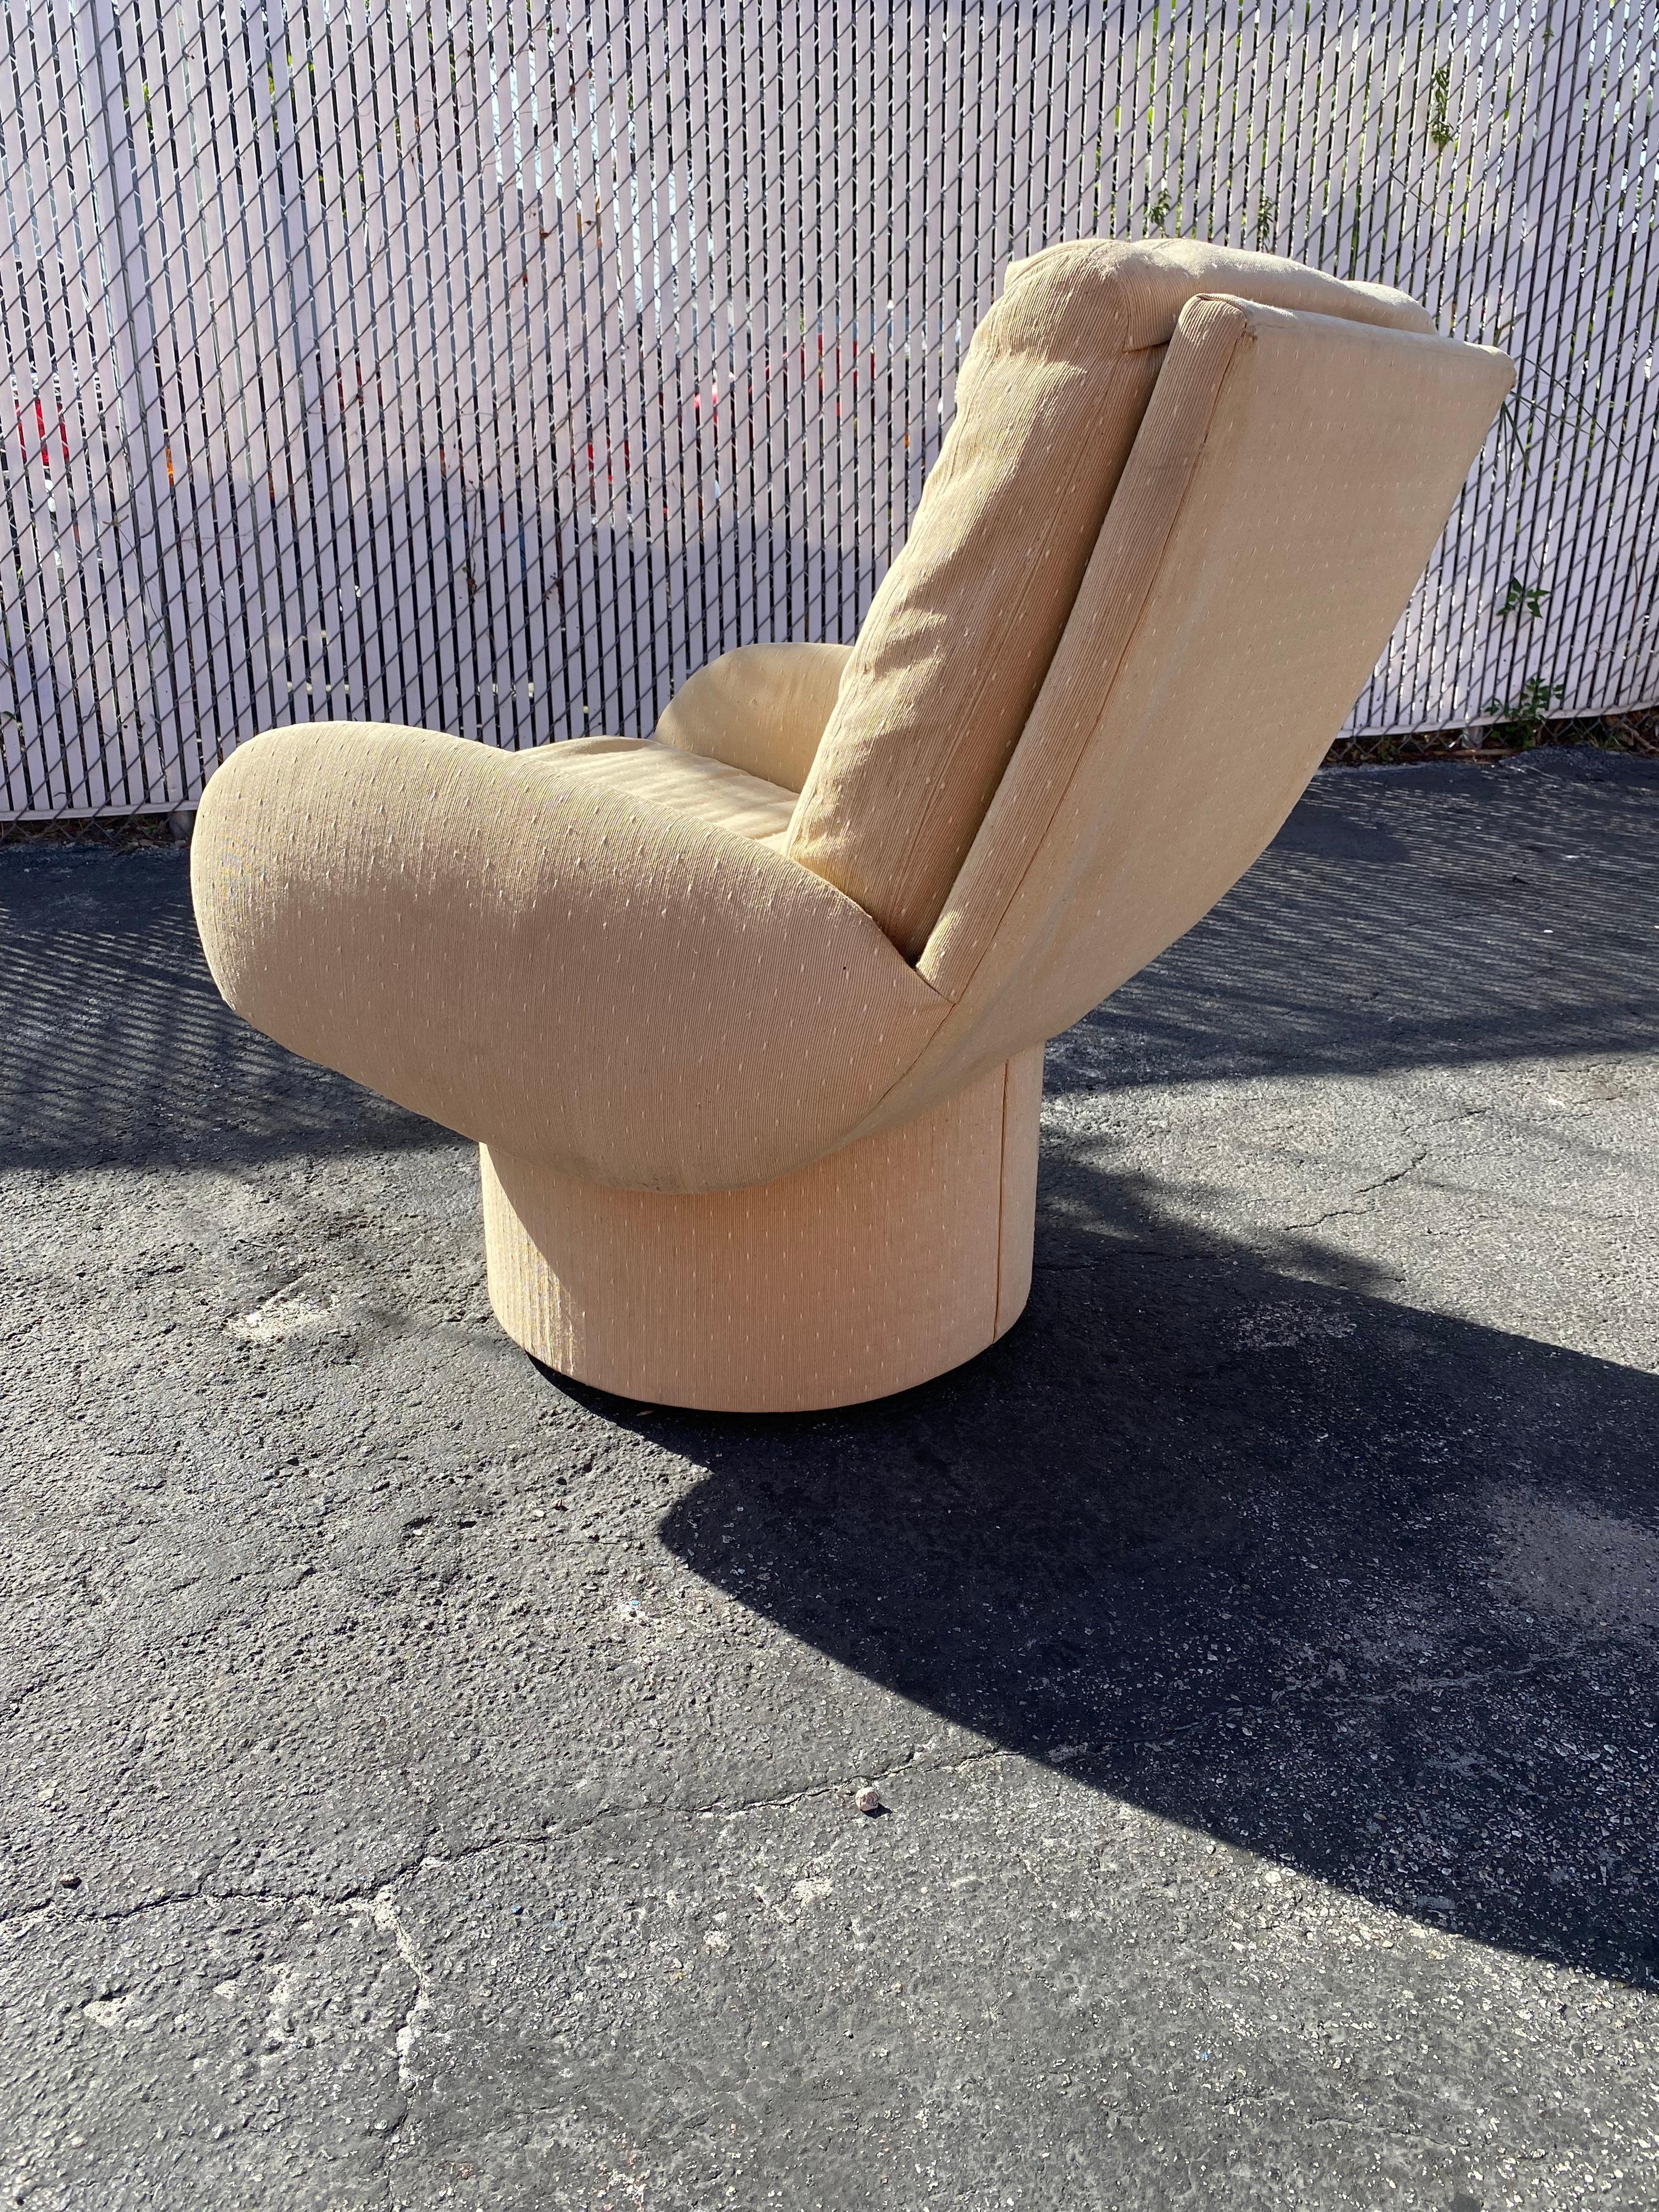 1980s Beige Plinth Base Swivel Chair  In Good Condition For Sale In Fort Lauderdale, FL